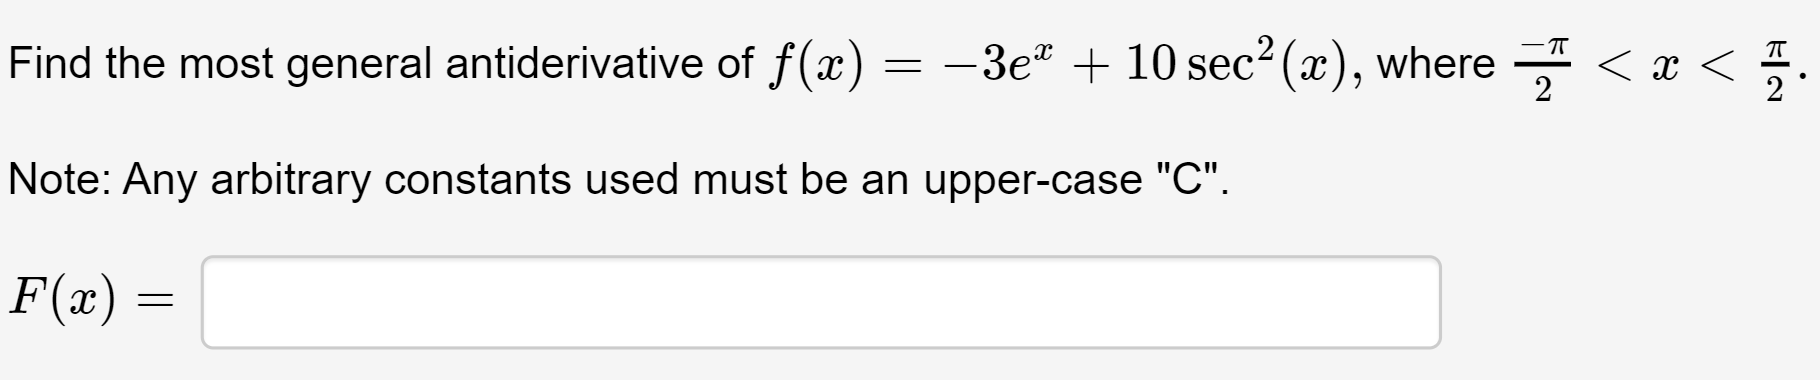 Find the most general antiderivative of f(x)
= -3e" + 10 sec2 (x), where - < x <
2
Note: Any arbitrary constants used must be an upper-case "C".
F(x) =
